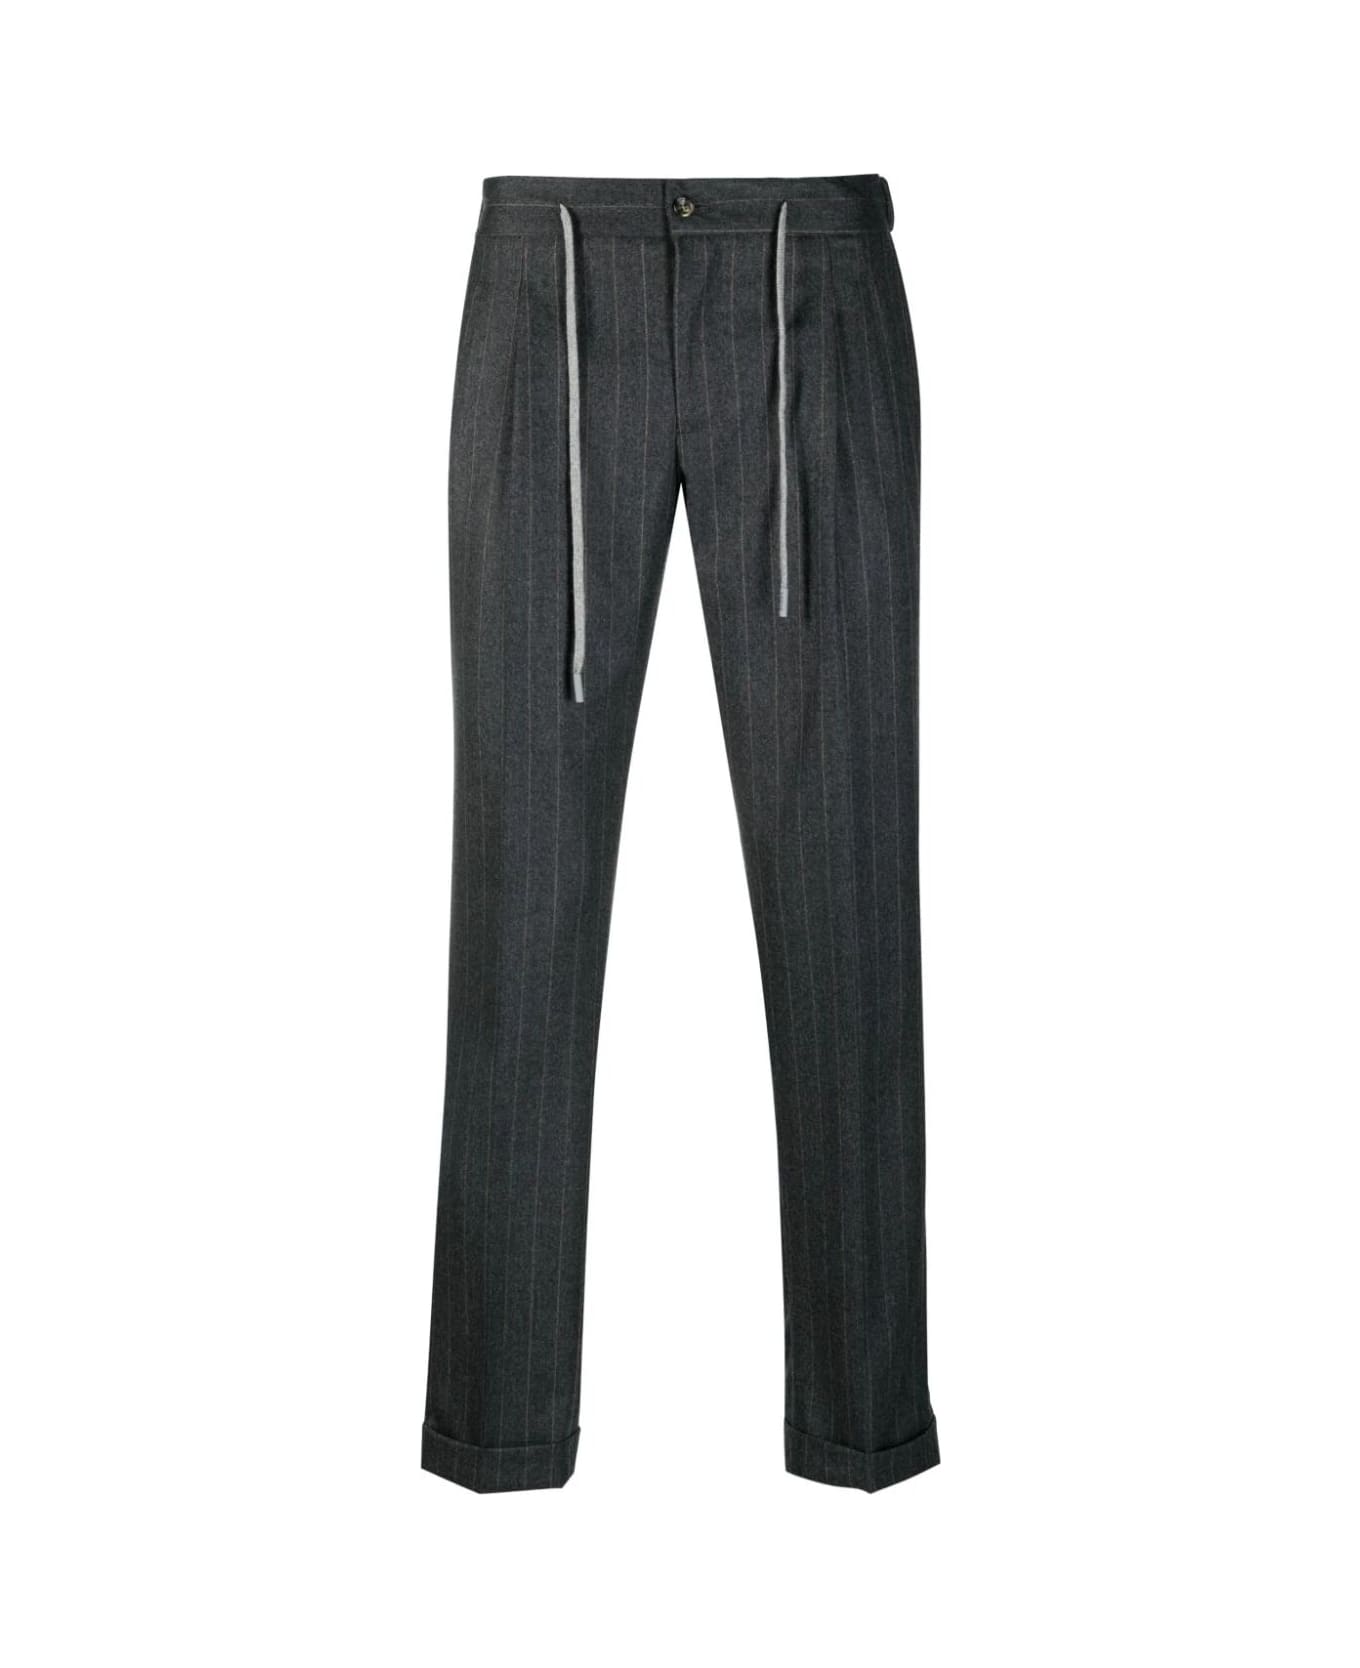 Barba Napoli Roma Coulisse Trousers - Grey ボトムス